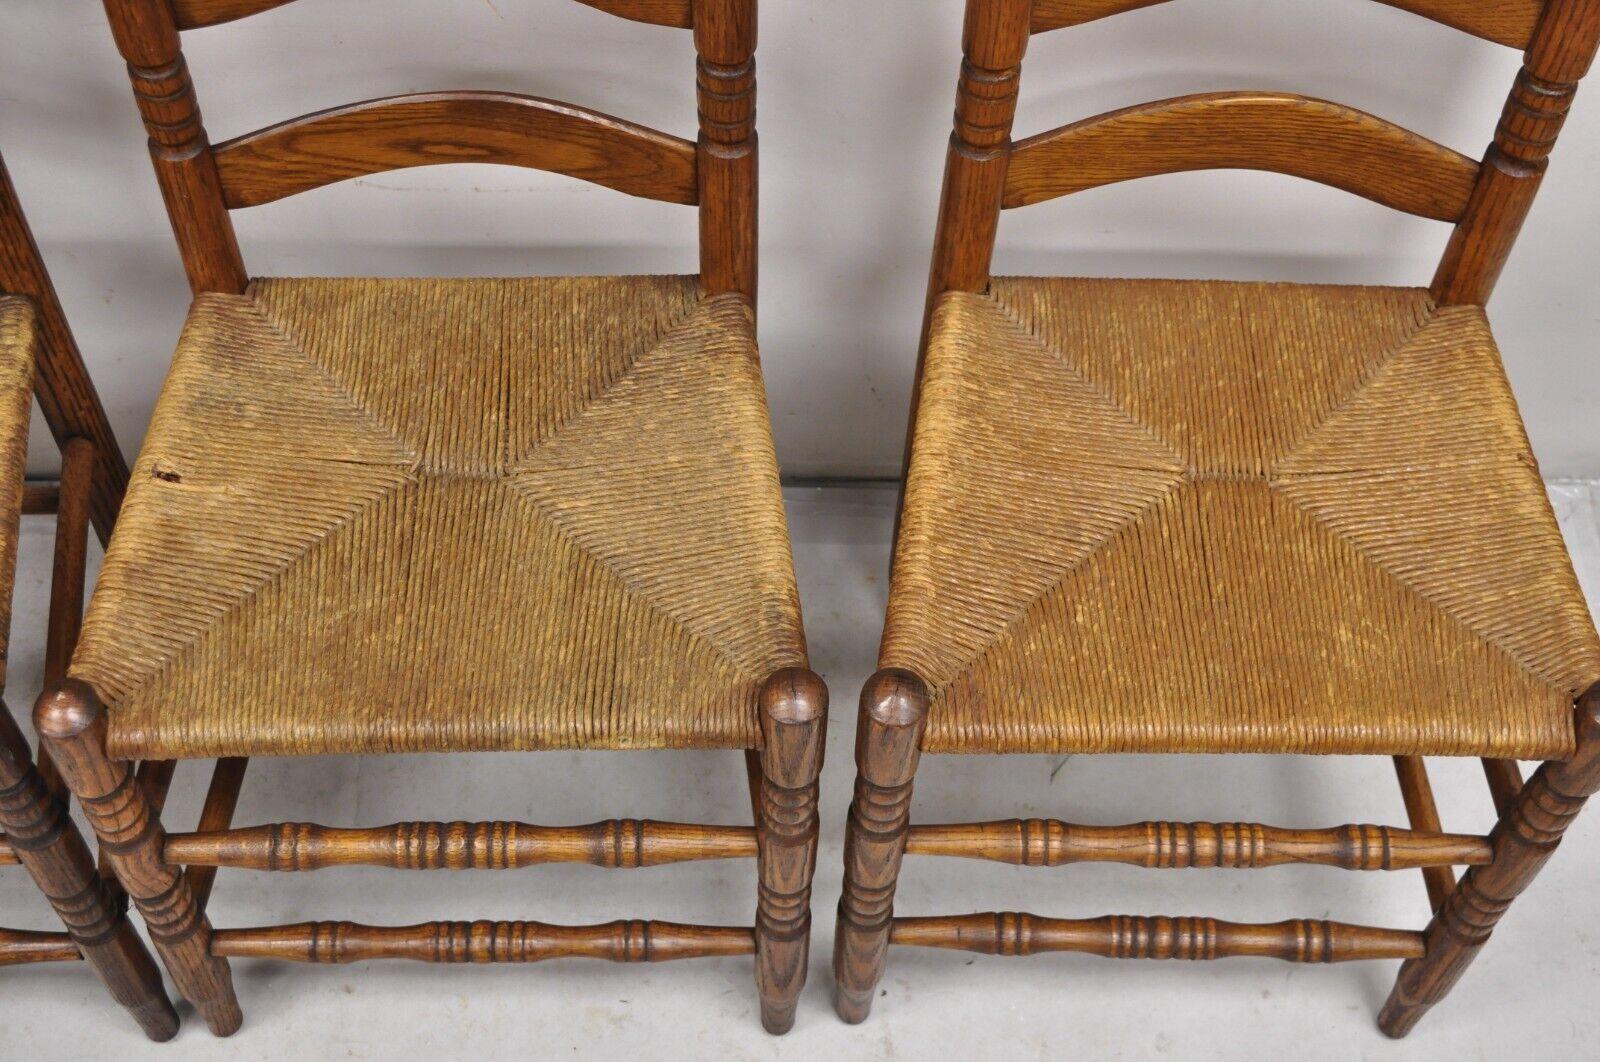 Early 20th Century Antique Ladderback Primitive Rustic Oak Wood Rush Seat Dining Chairs - Set of 4 For Sale